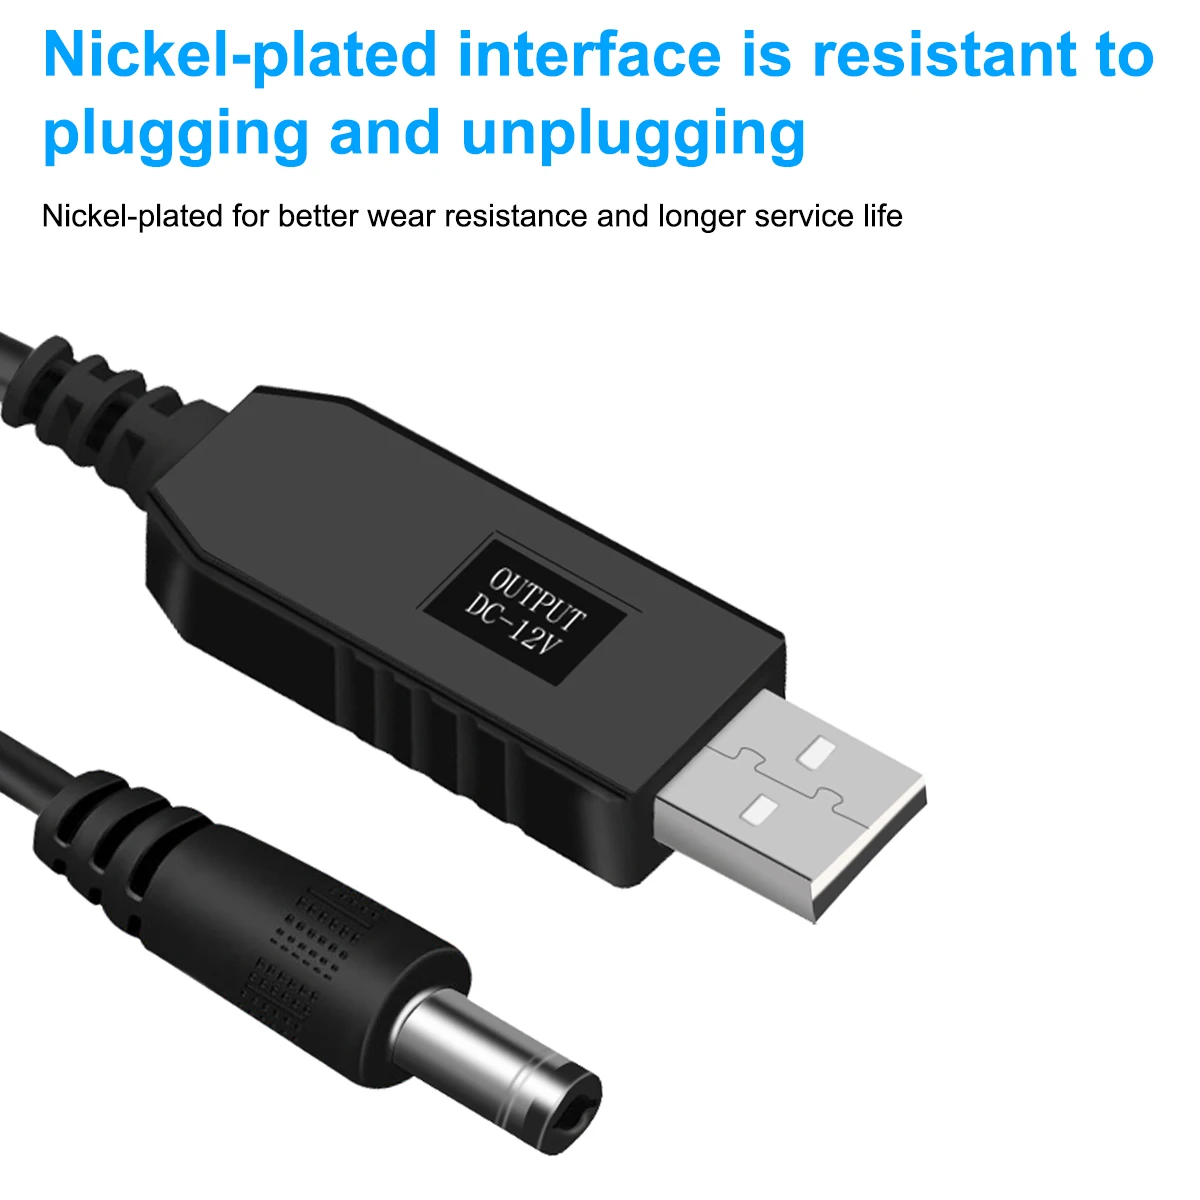 Fonken WiFi to Powerbank Cable Connector DC 5V to 12V USB Cable Boost Converter Step-up Cord for Wifi Router Modem Fan Speaker